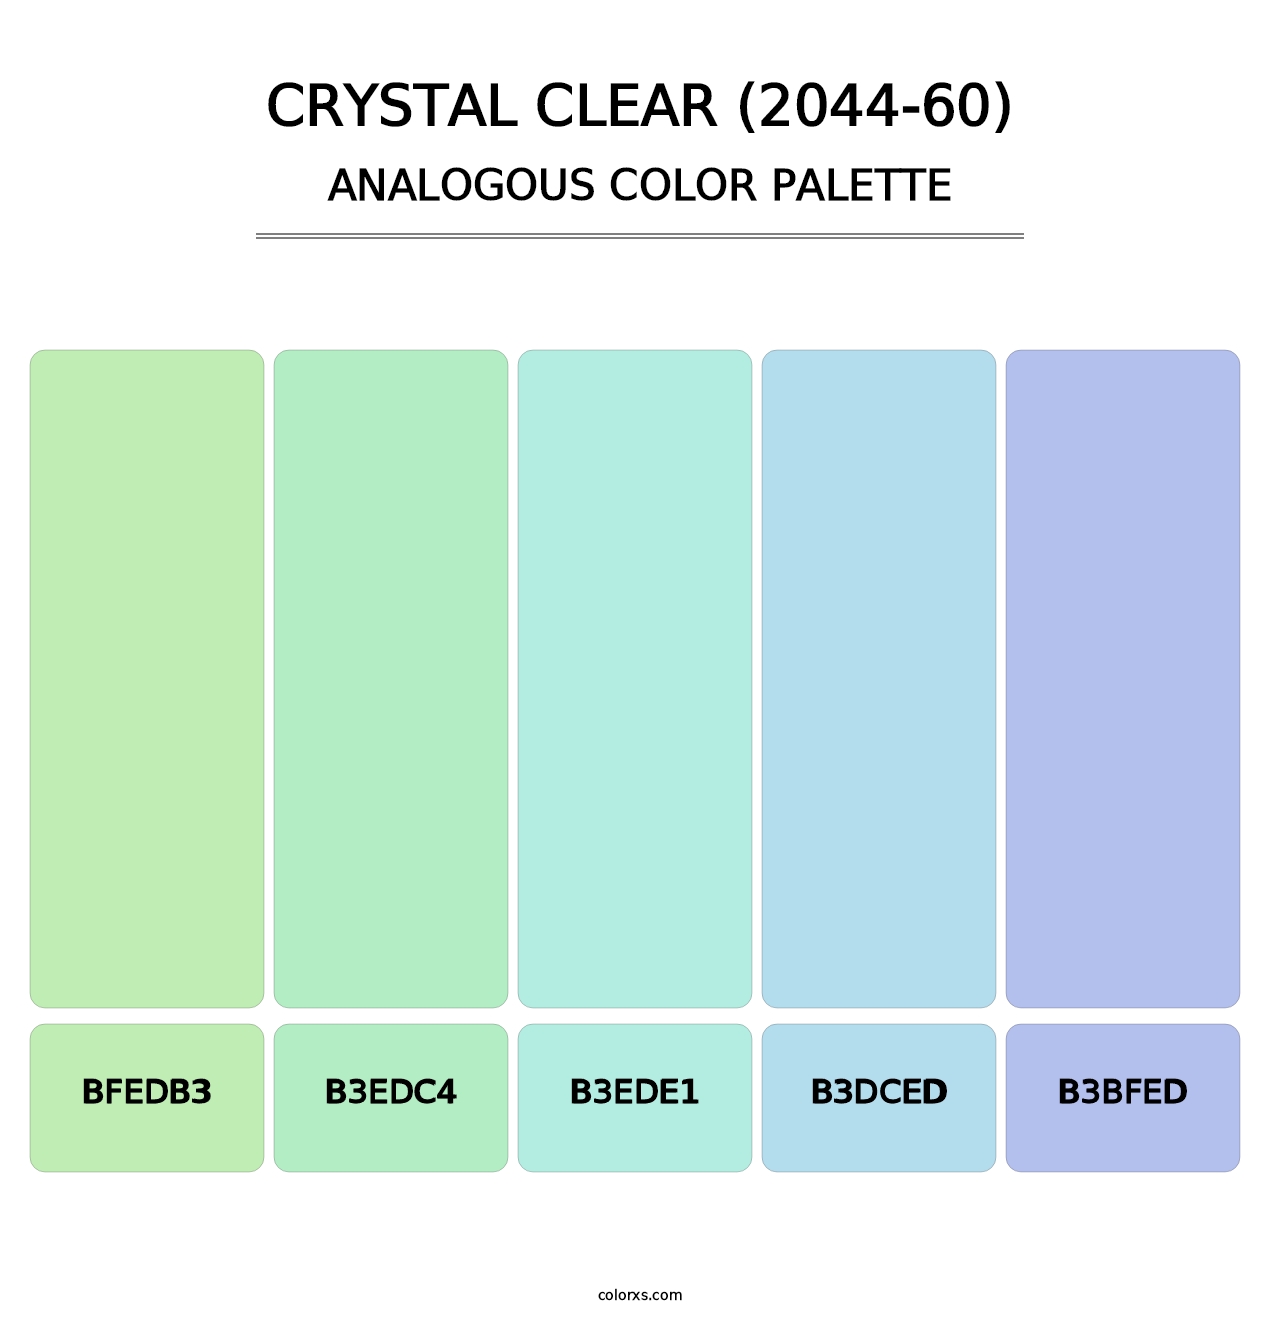 Crystal Clear (2044-60) - Analogous Color Palette